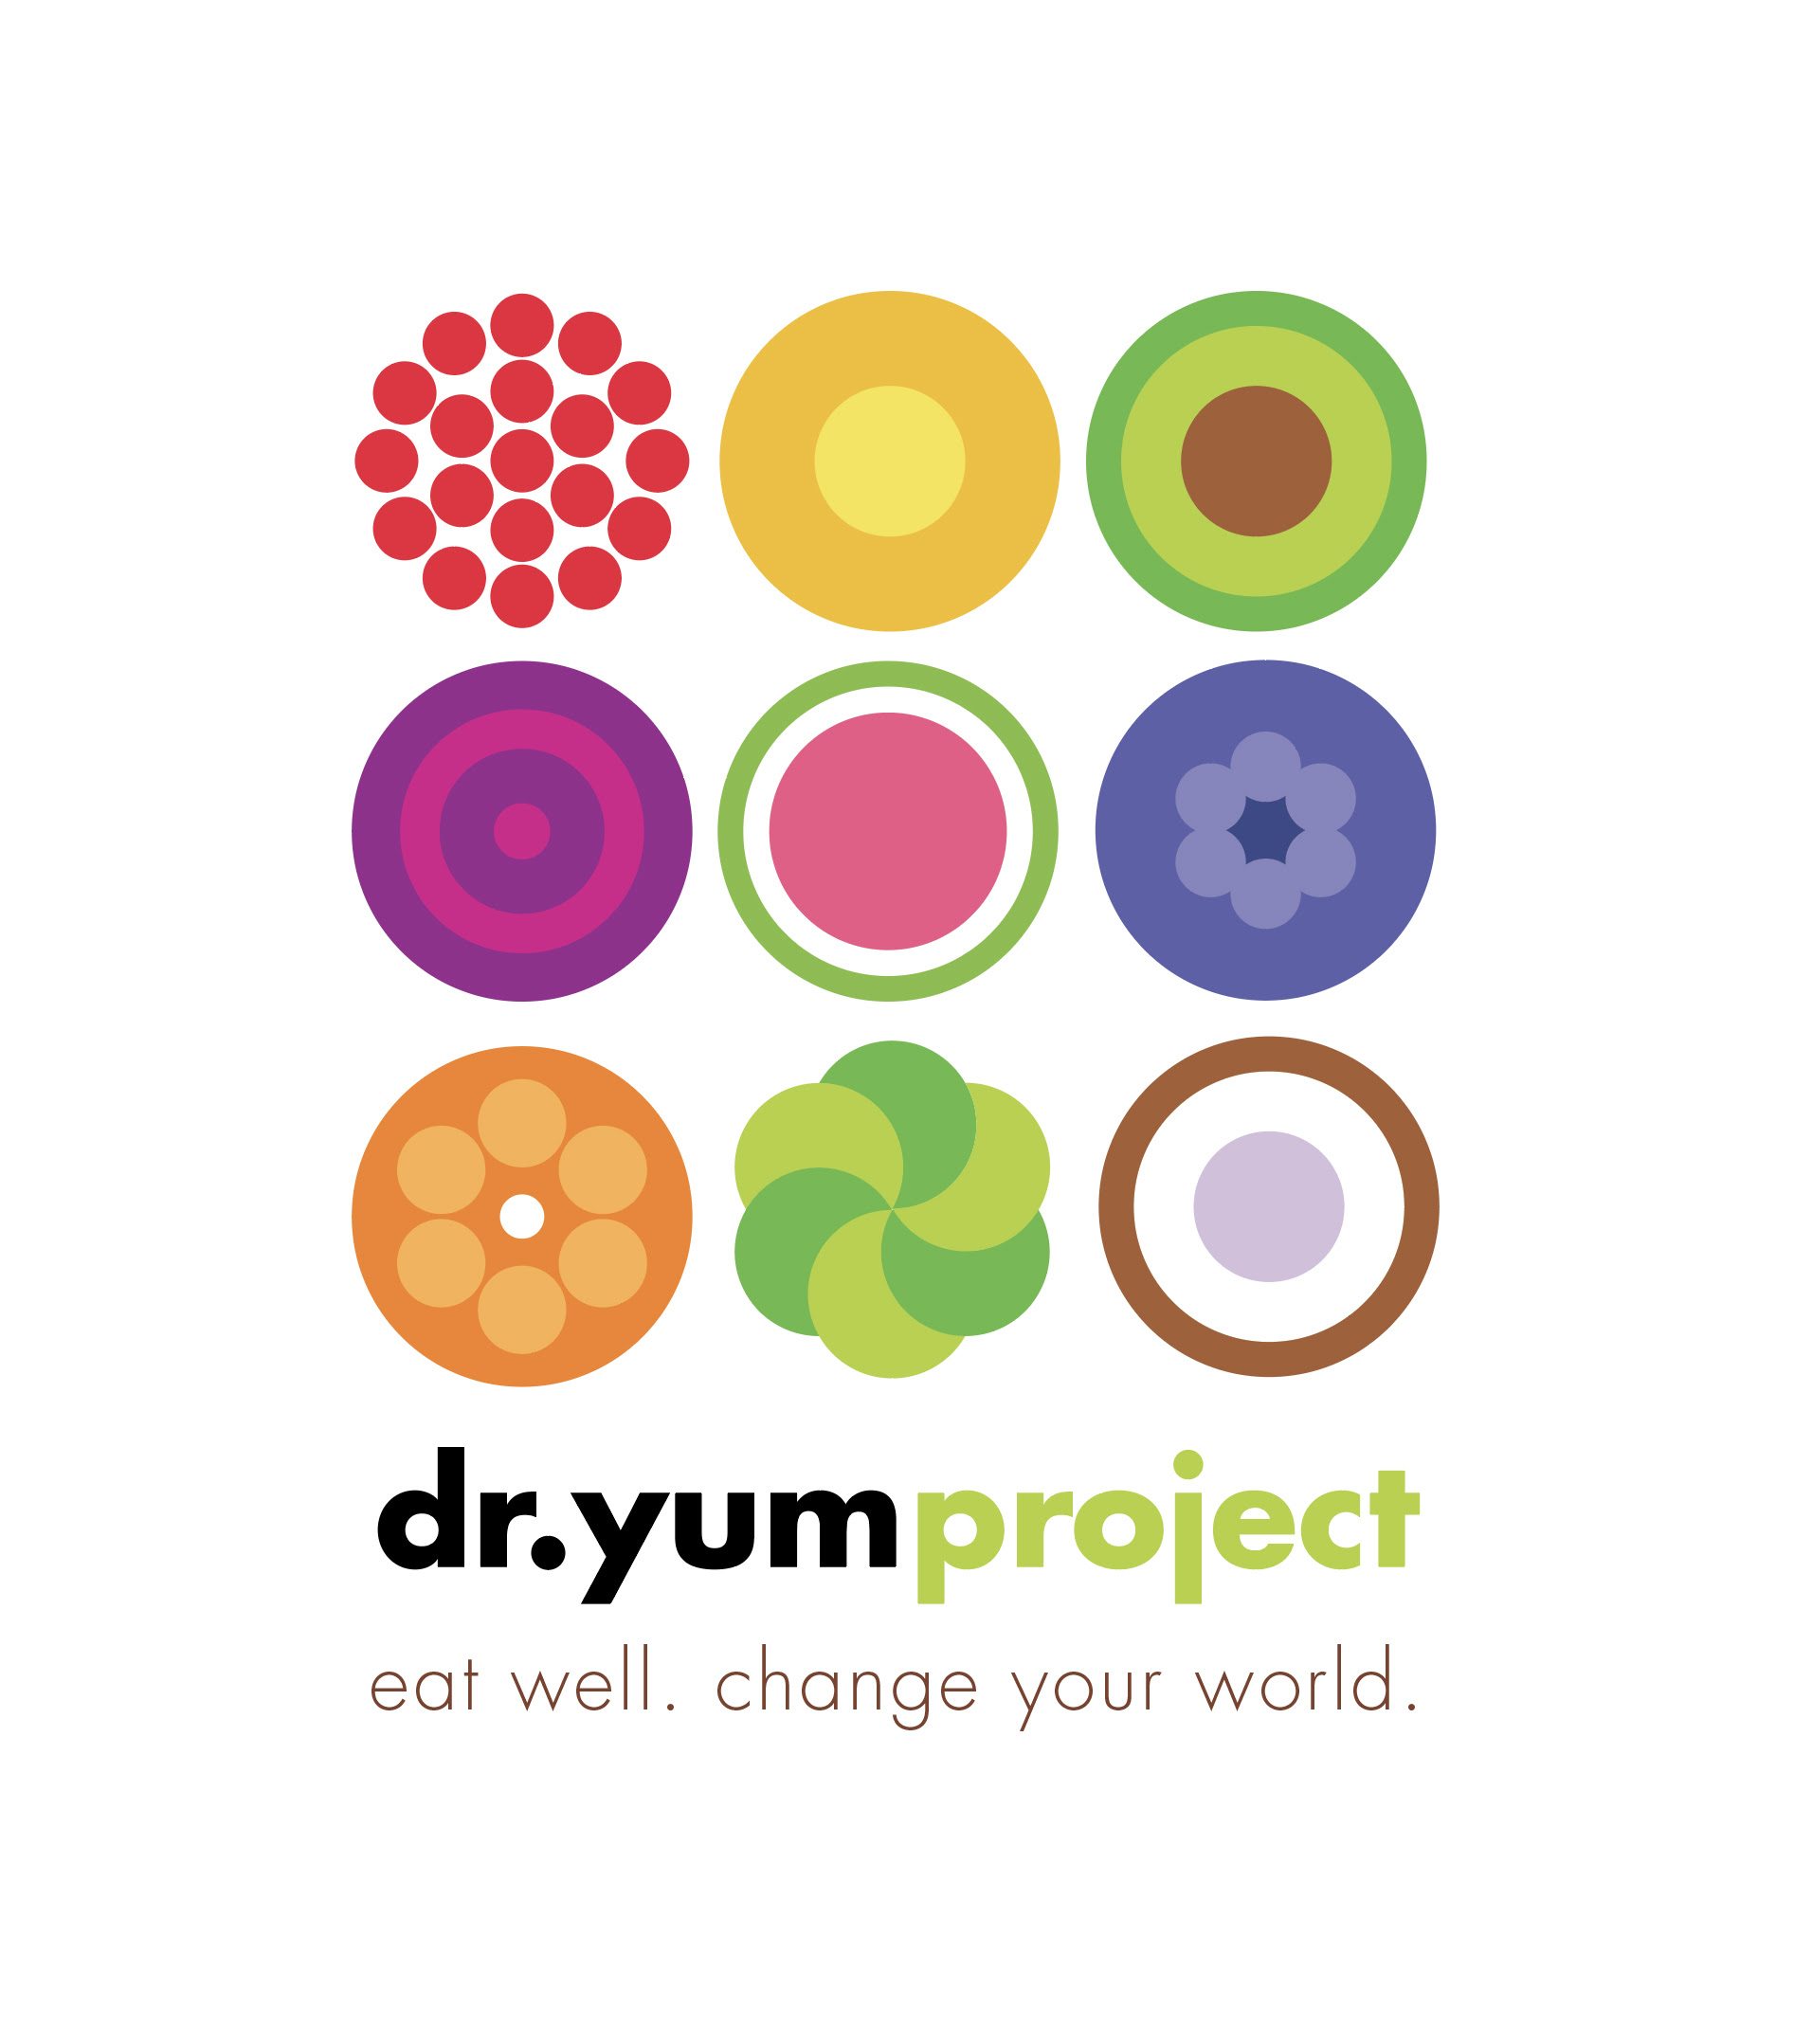 "Dr. Yum Project".